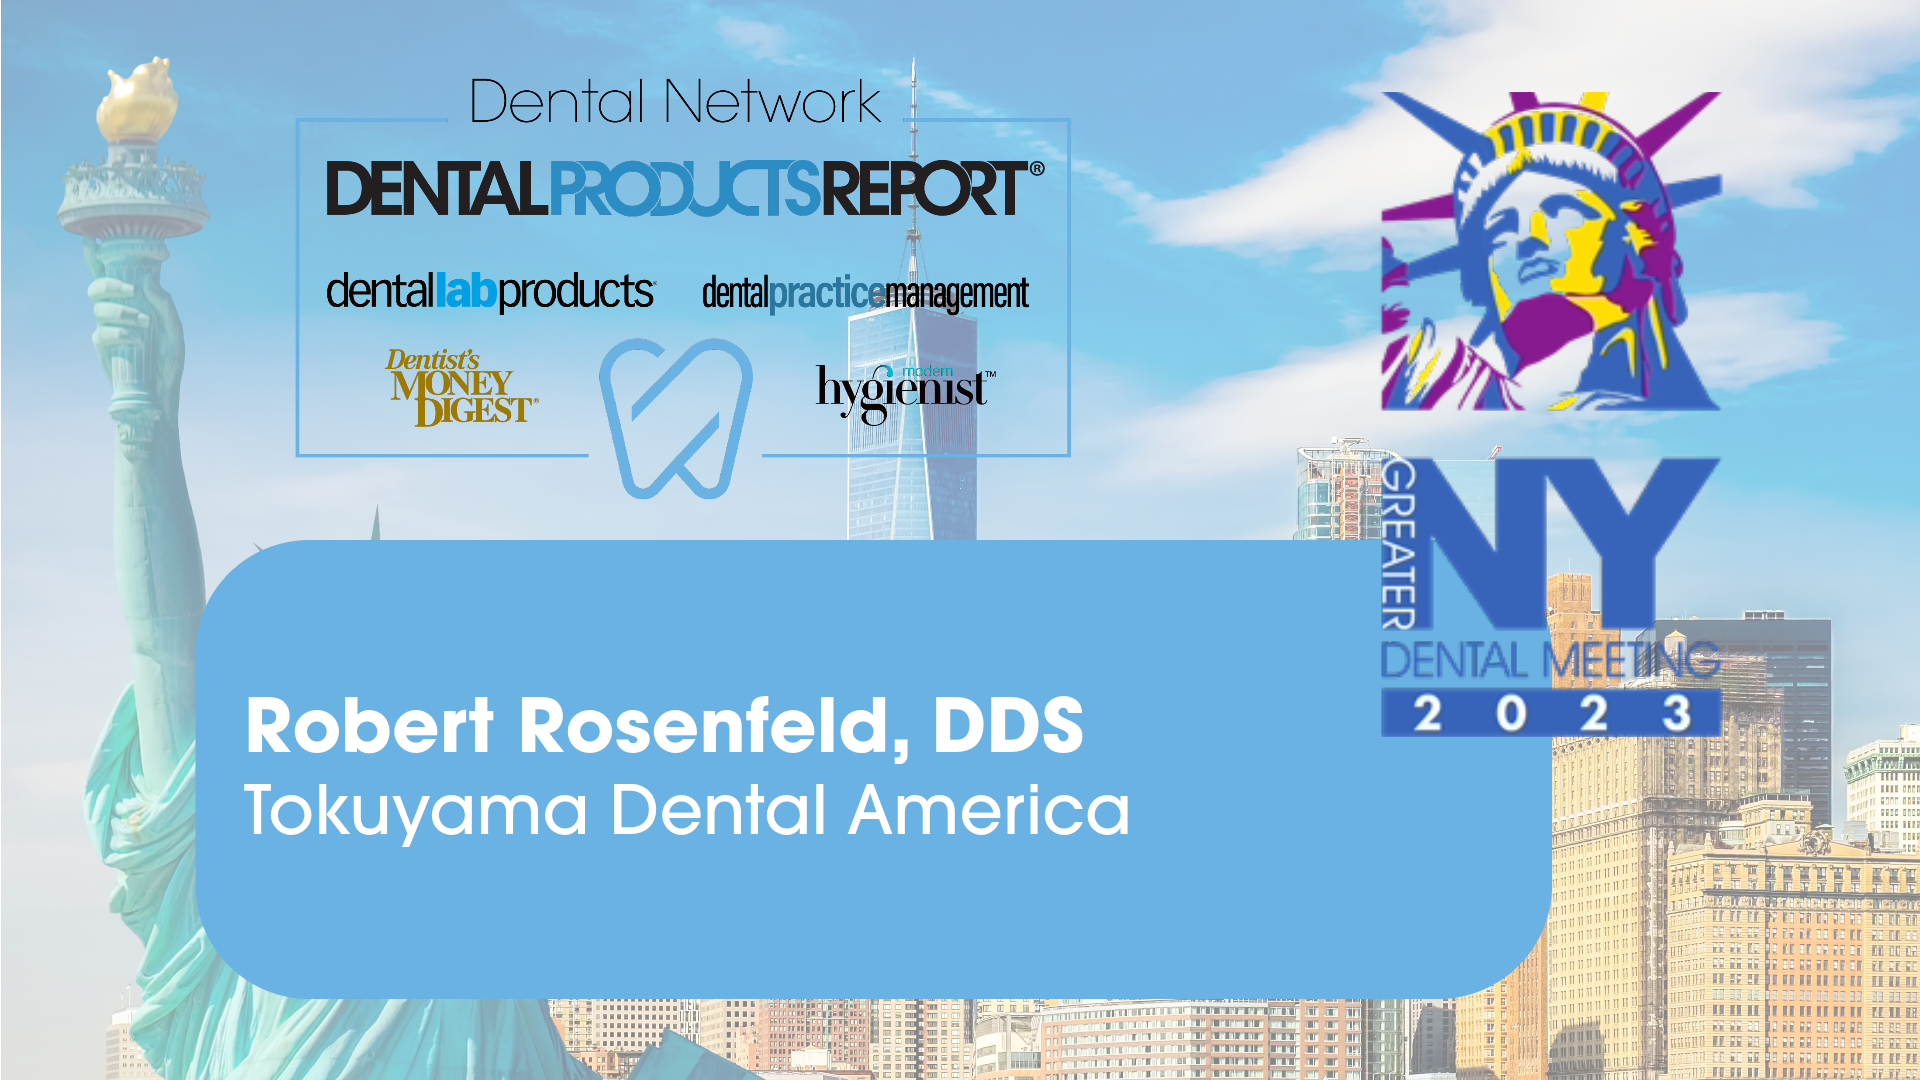 Greater New York Dental Meeting interview with Robert Rosenfeld, DDS from Tokuyama Dental America